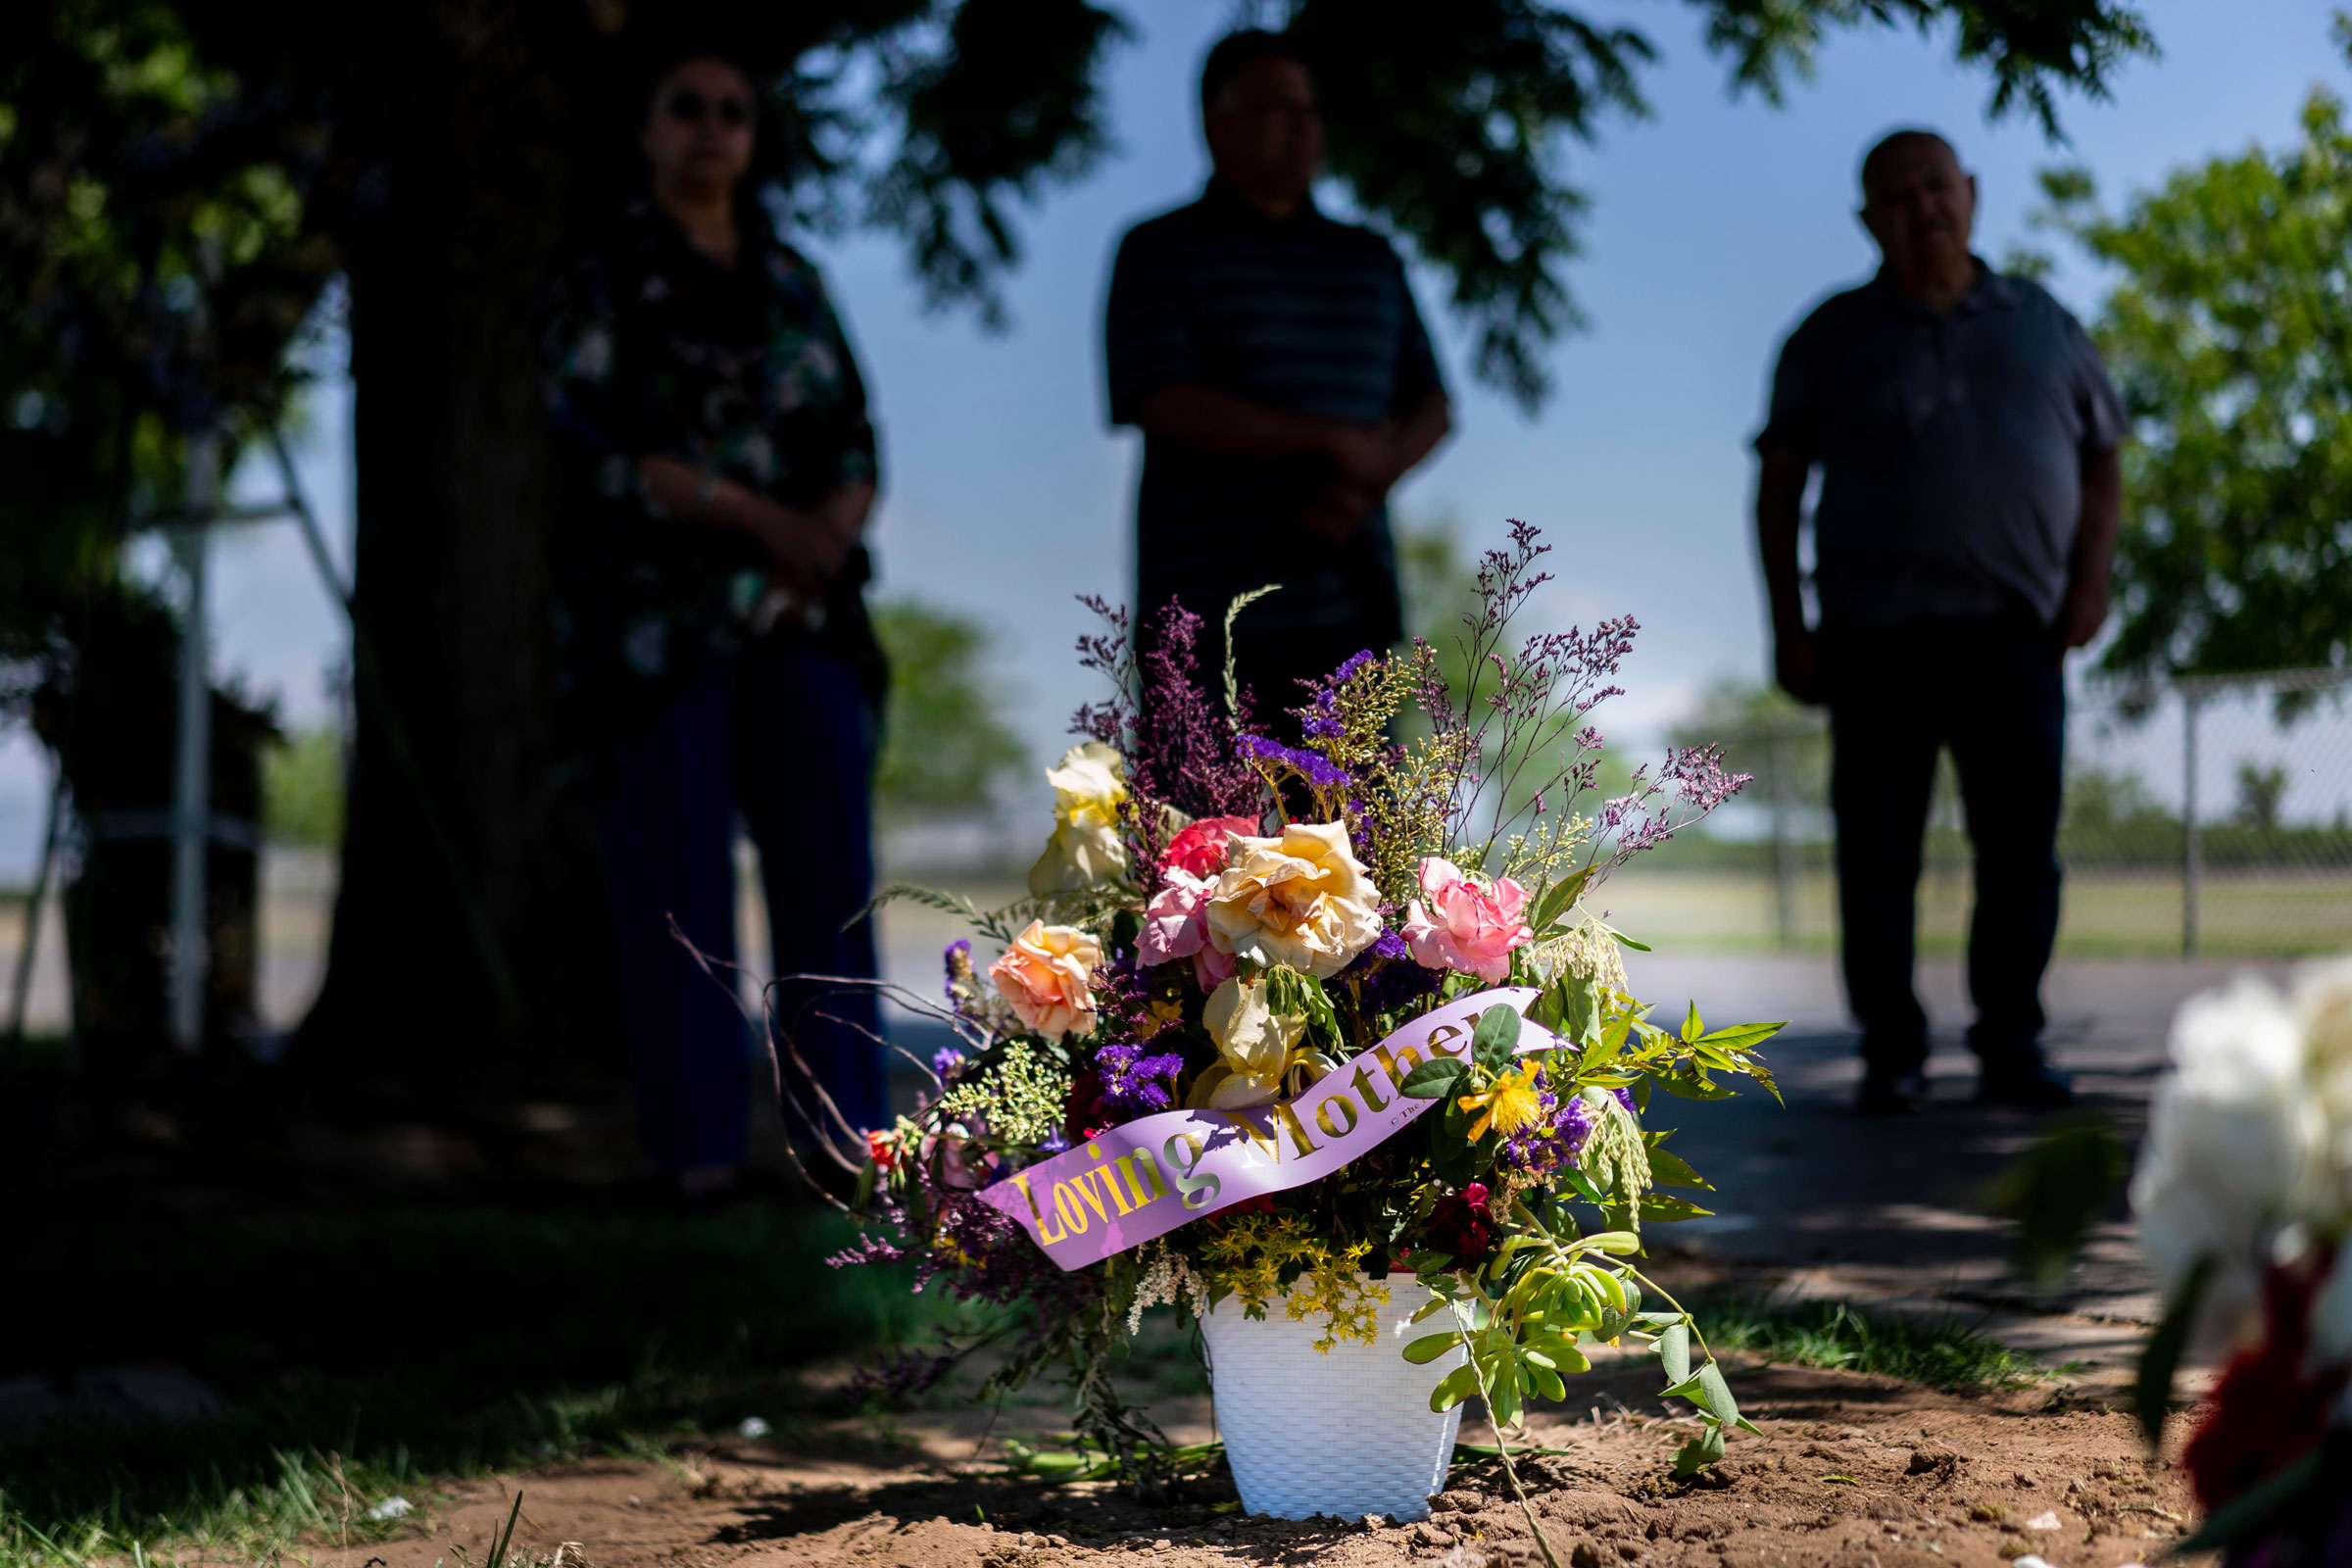 A family mourning at a grave site at Smith Mountain Cemetery in Dinuba, California